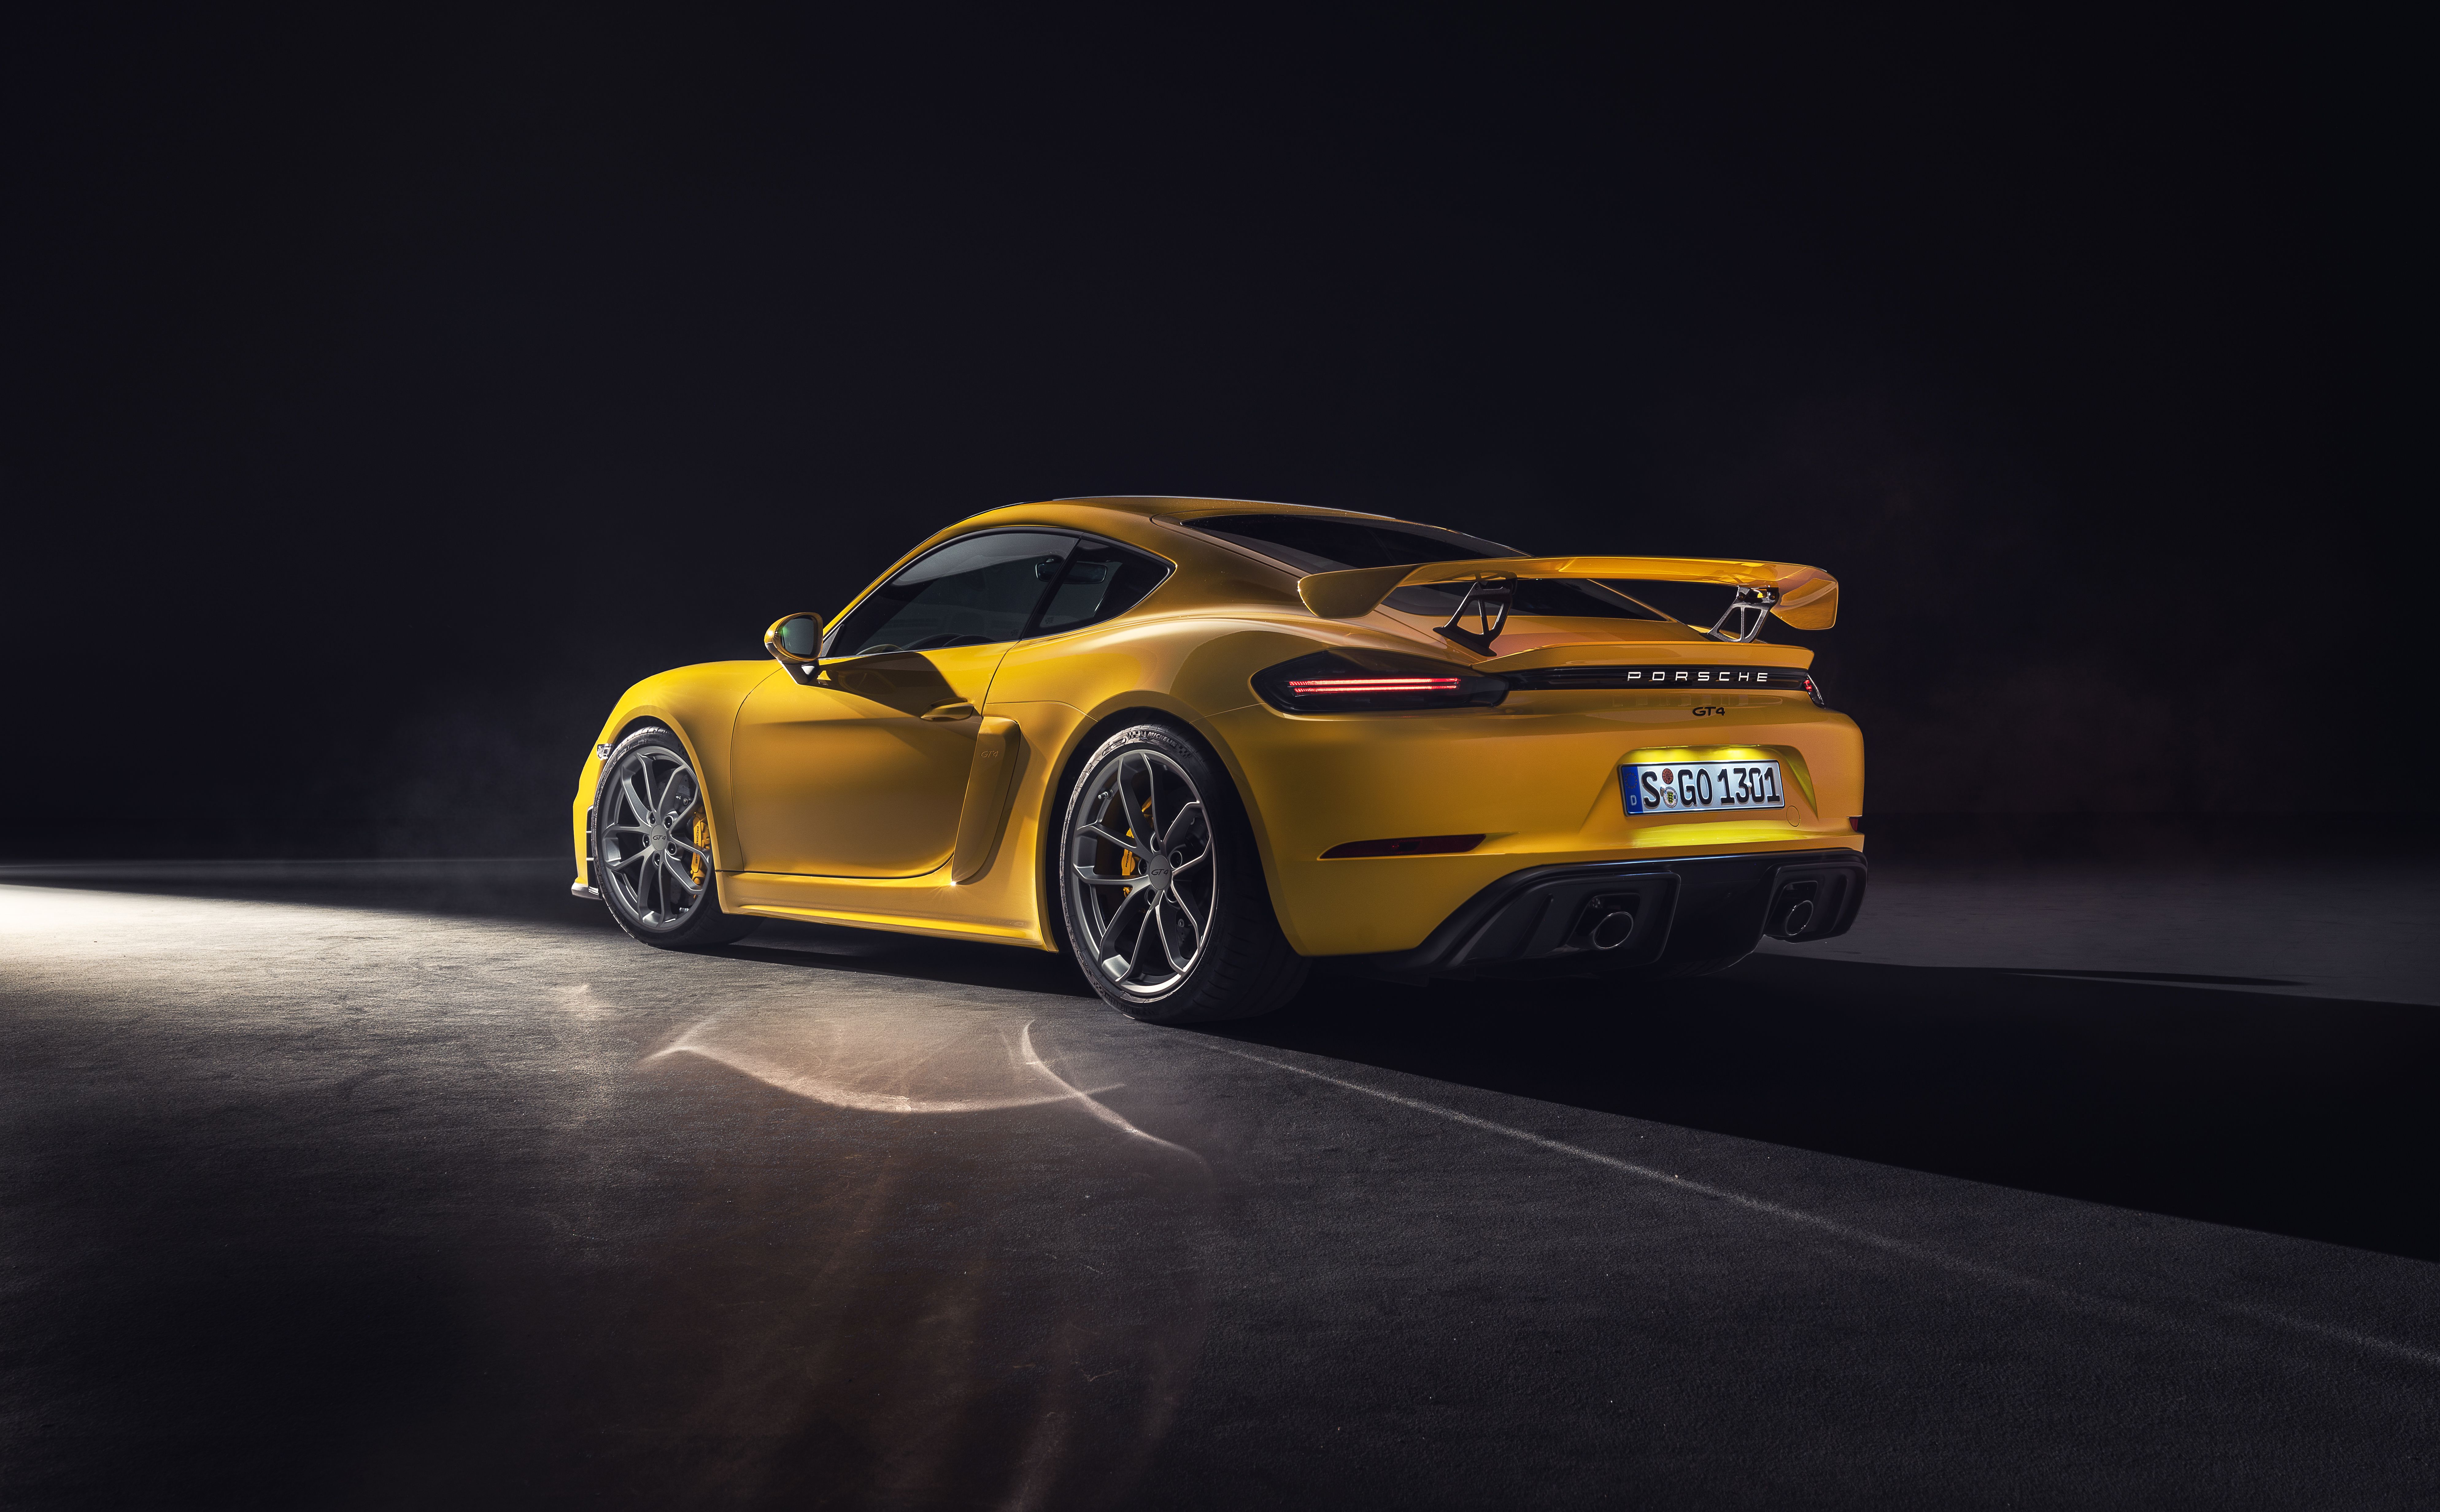 Wallpaper Of The Day Porsche Cayman Gt4 With Image